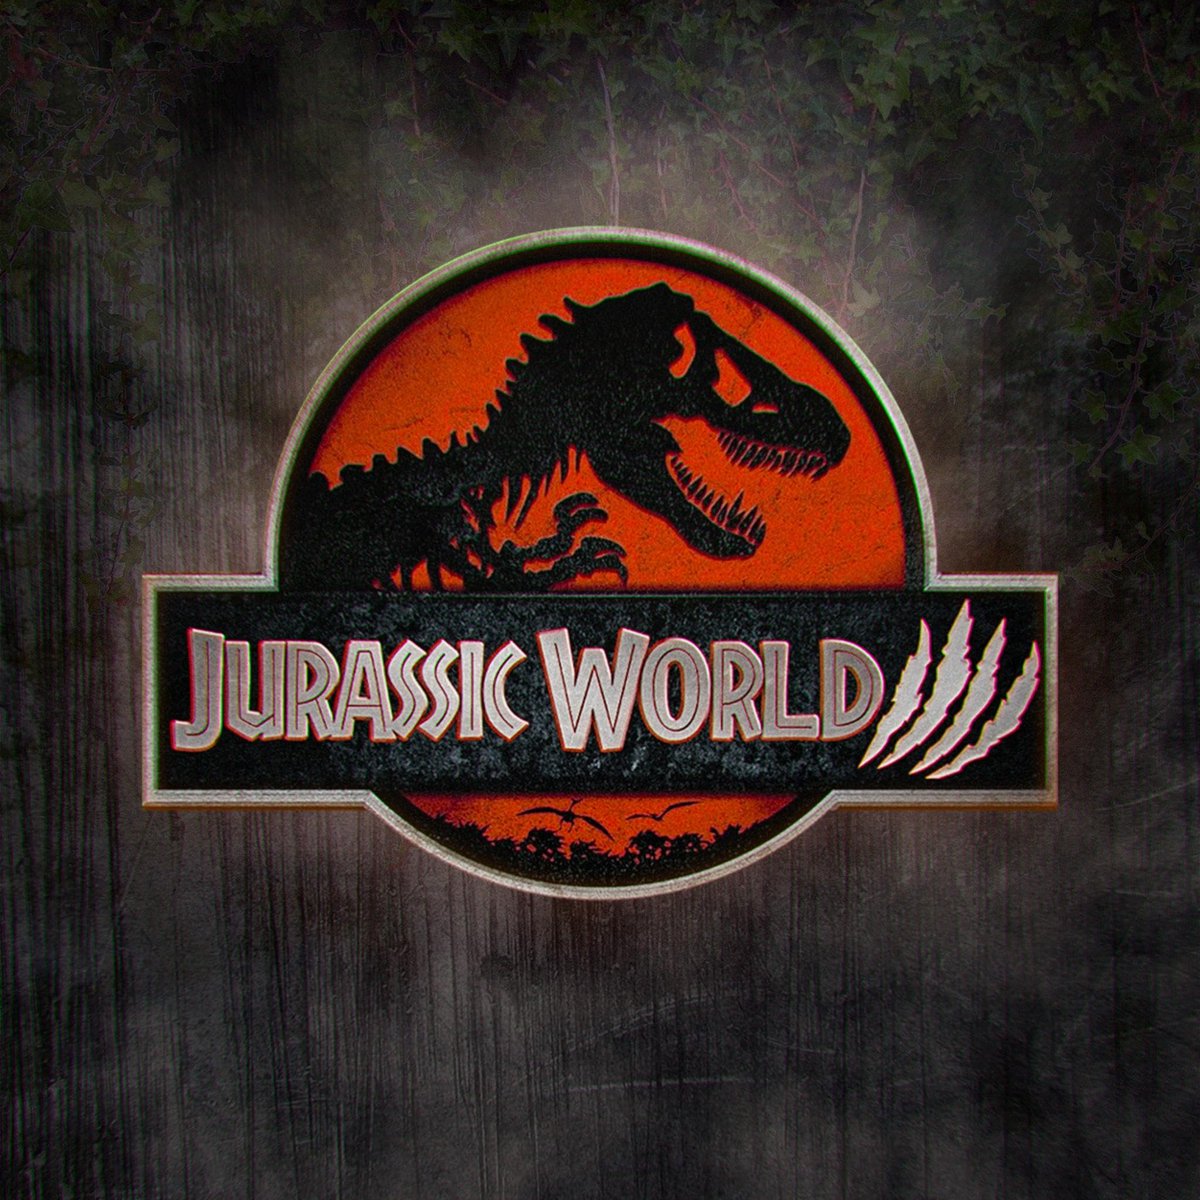 In exactly one month, the next Jurassic World film is expected to begin filming in Krabi on Thailand's west coast.

What do you hope to see with the new movie?